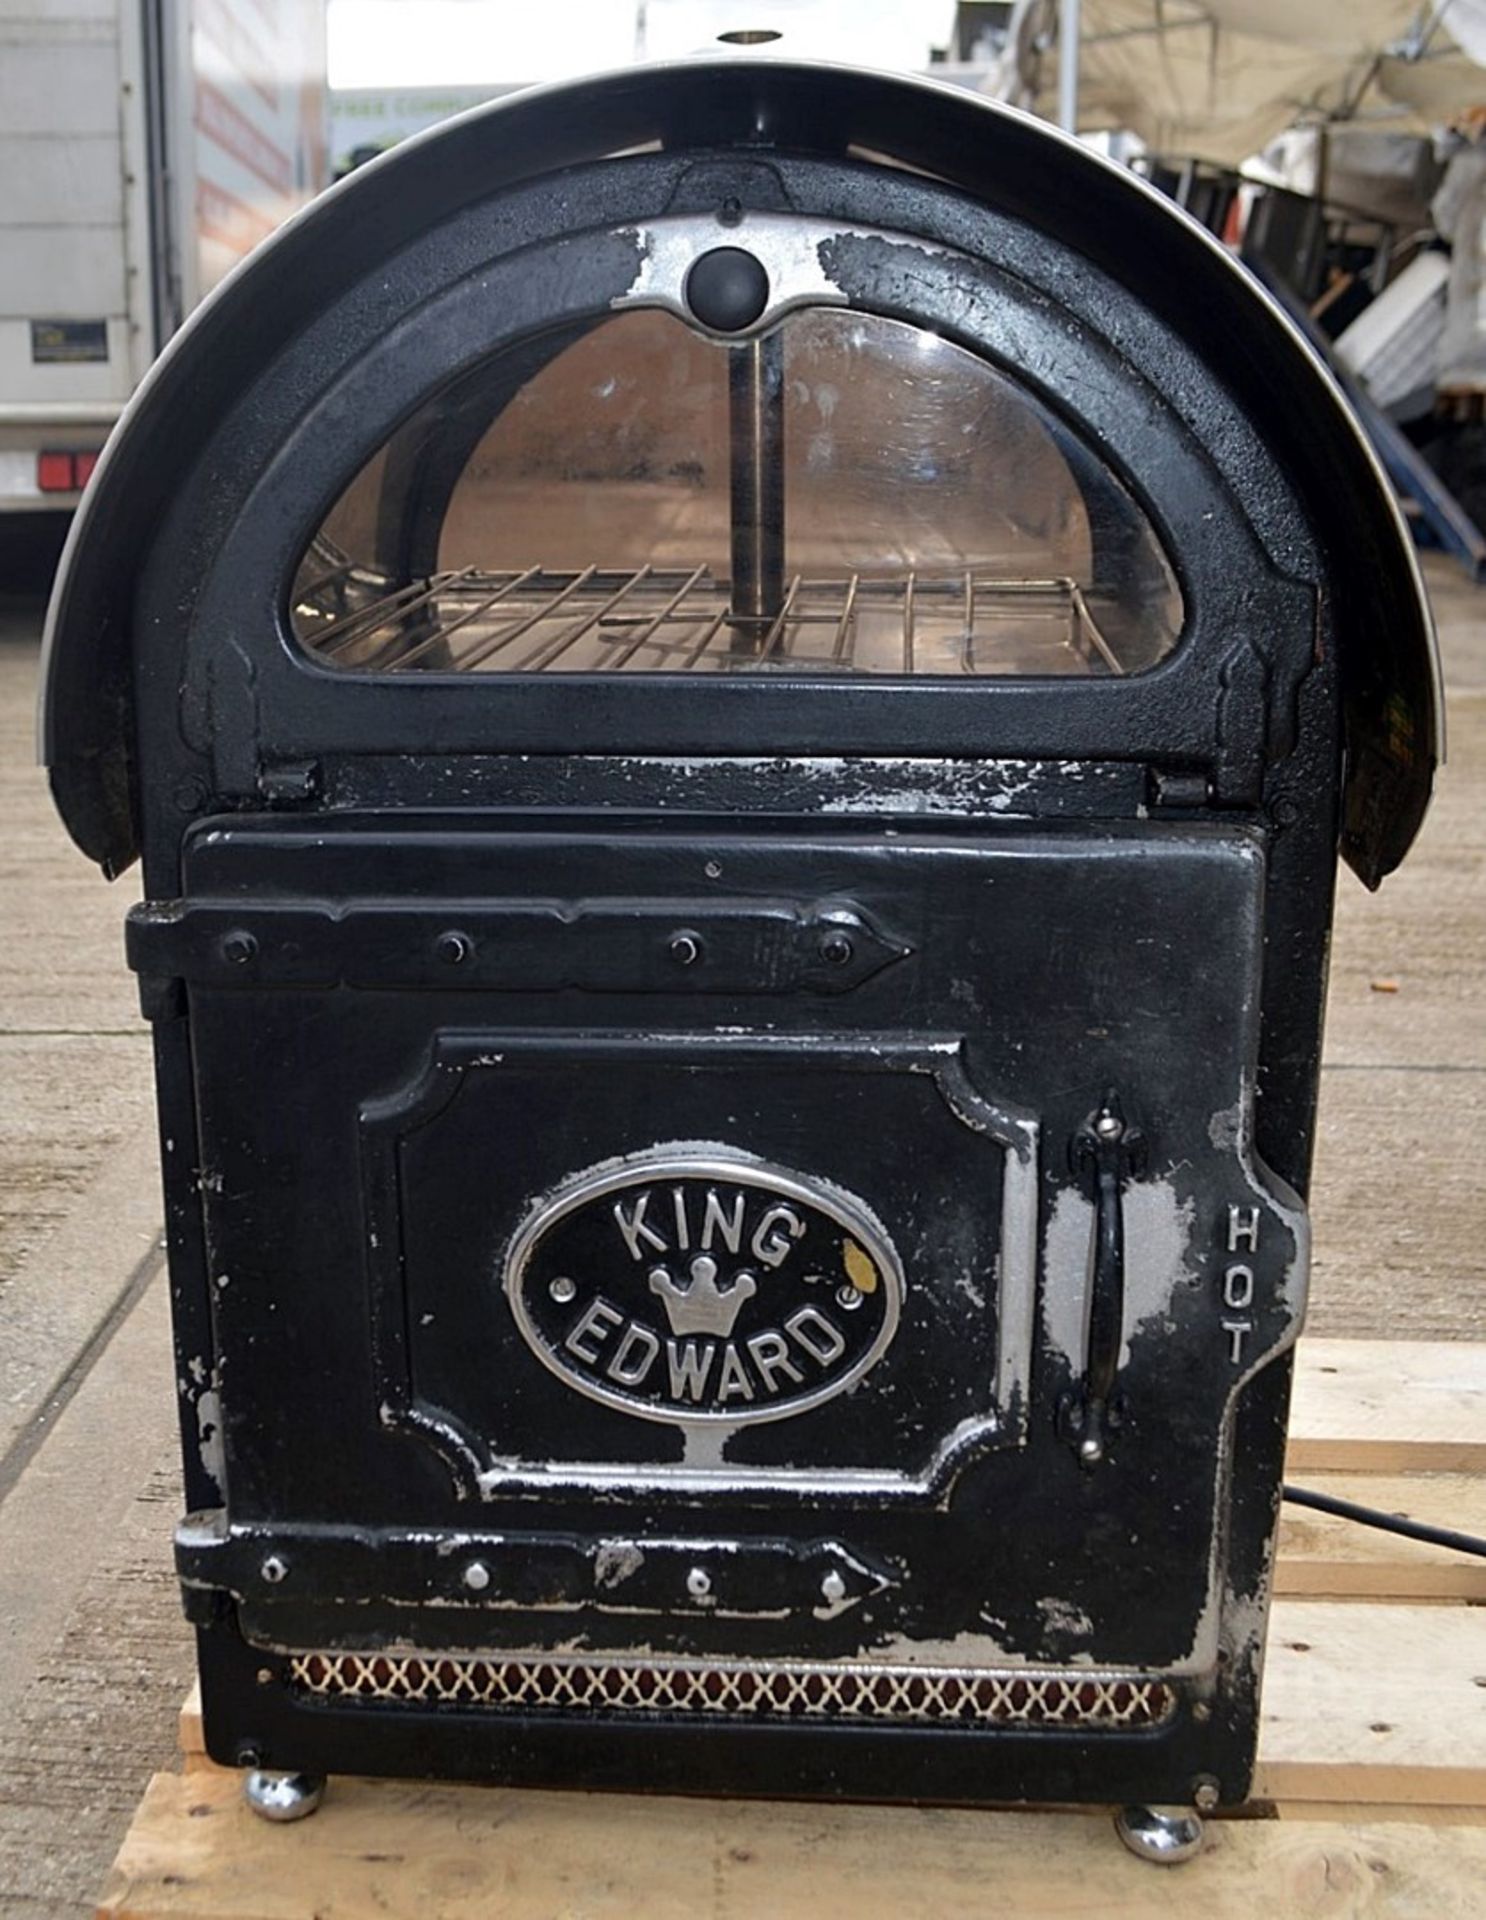 1 x King Edward Large Commercial Potato Baker In Black - Dimensions: D56 x W52 x H80cm - Preowned - Image 4 of 10